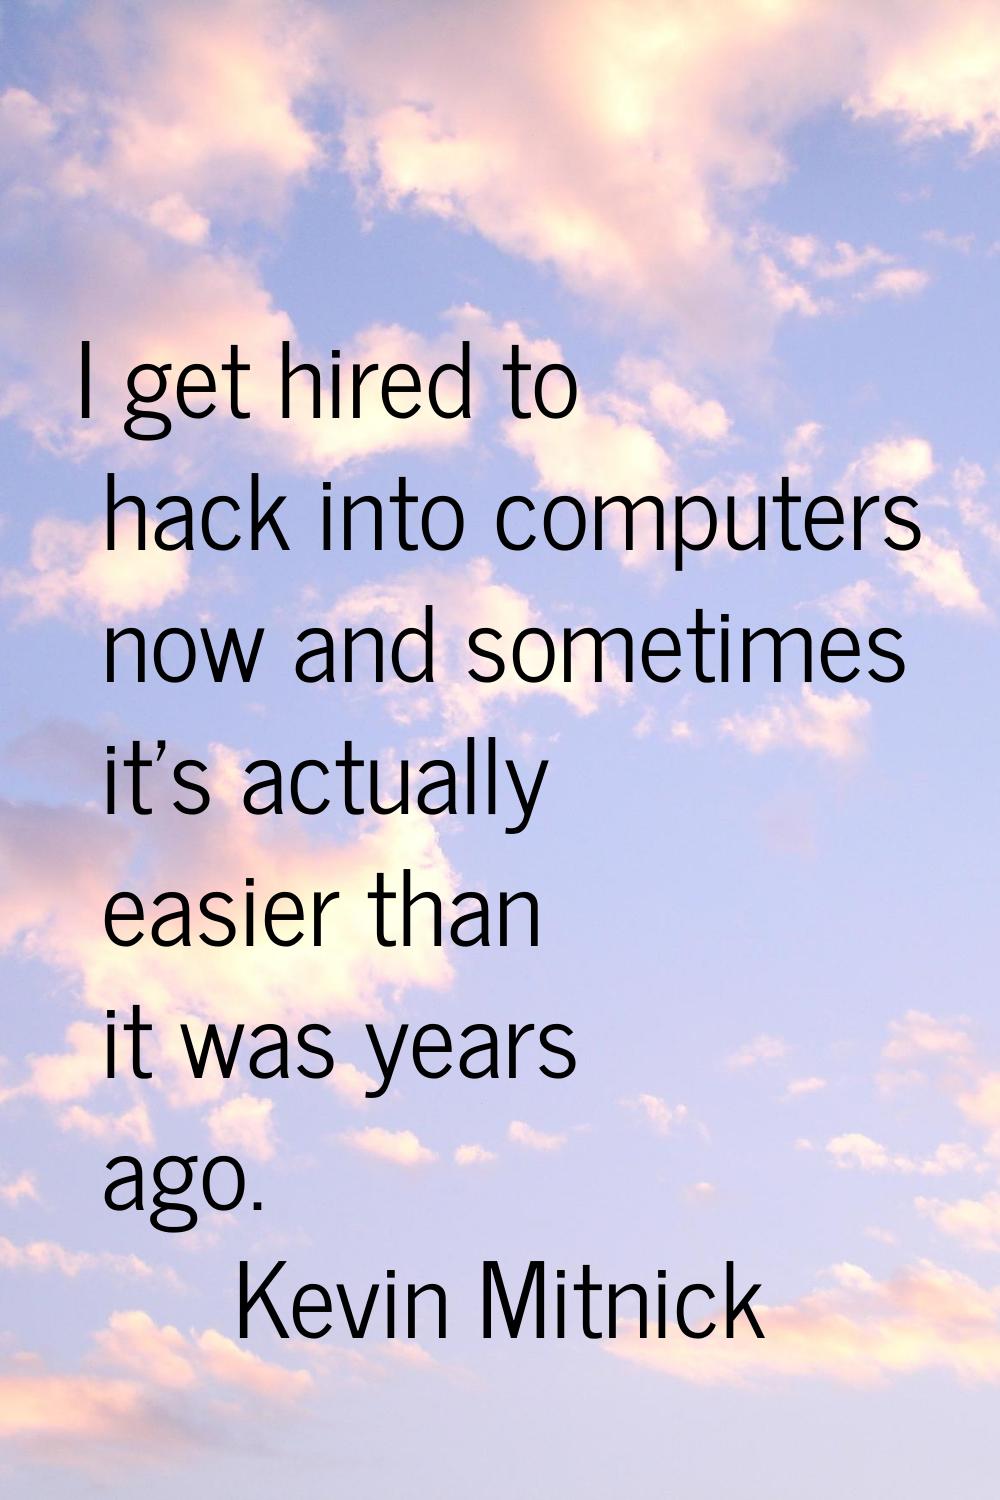 I get hired to hack into computers now and sometimes it's actually easier than it was years ago.